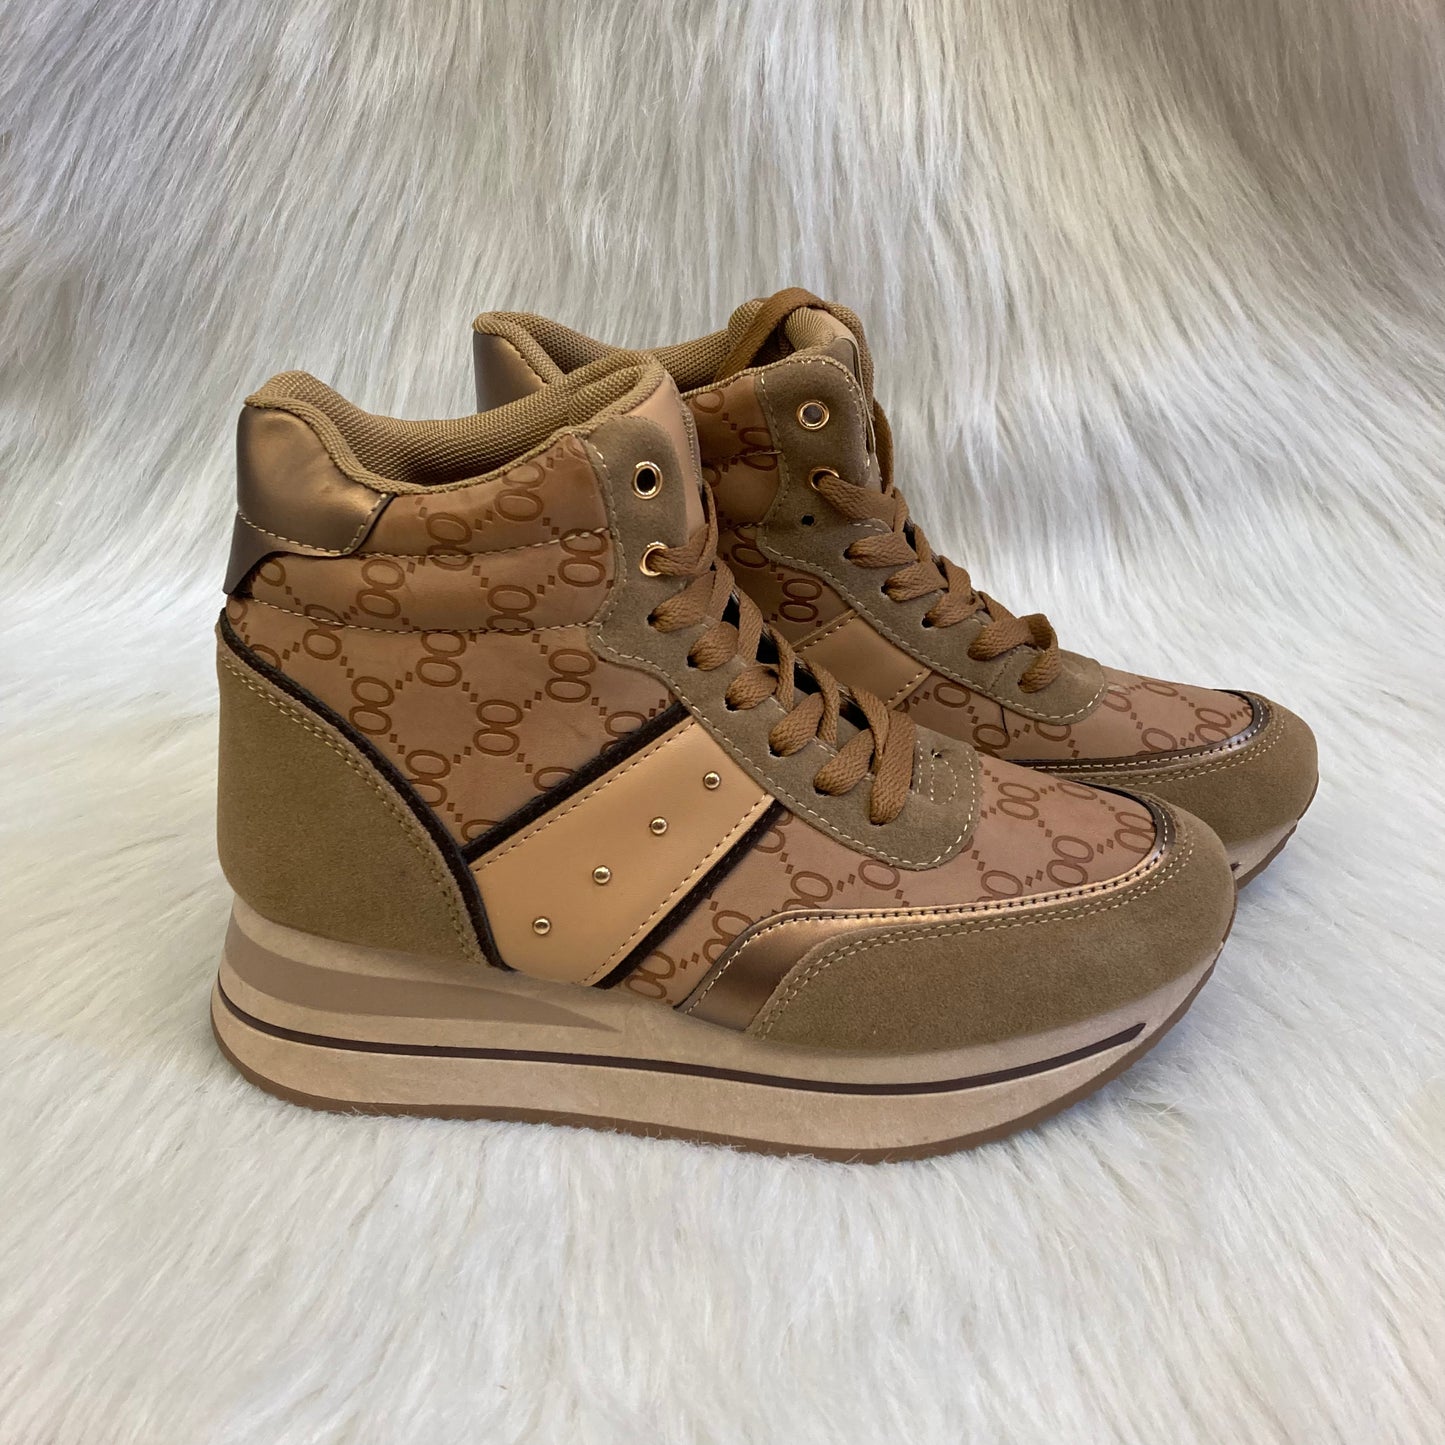 Camel wedge high-top trainer with pattern inspired